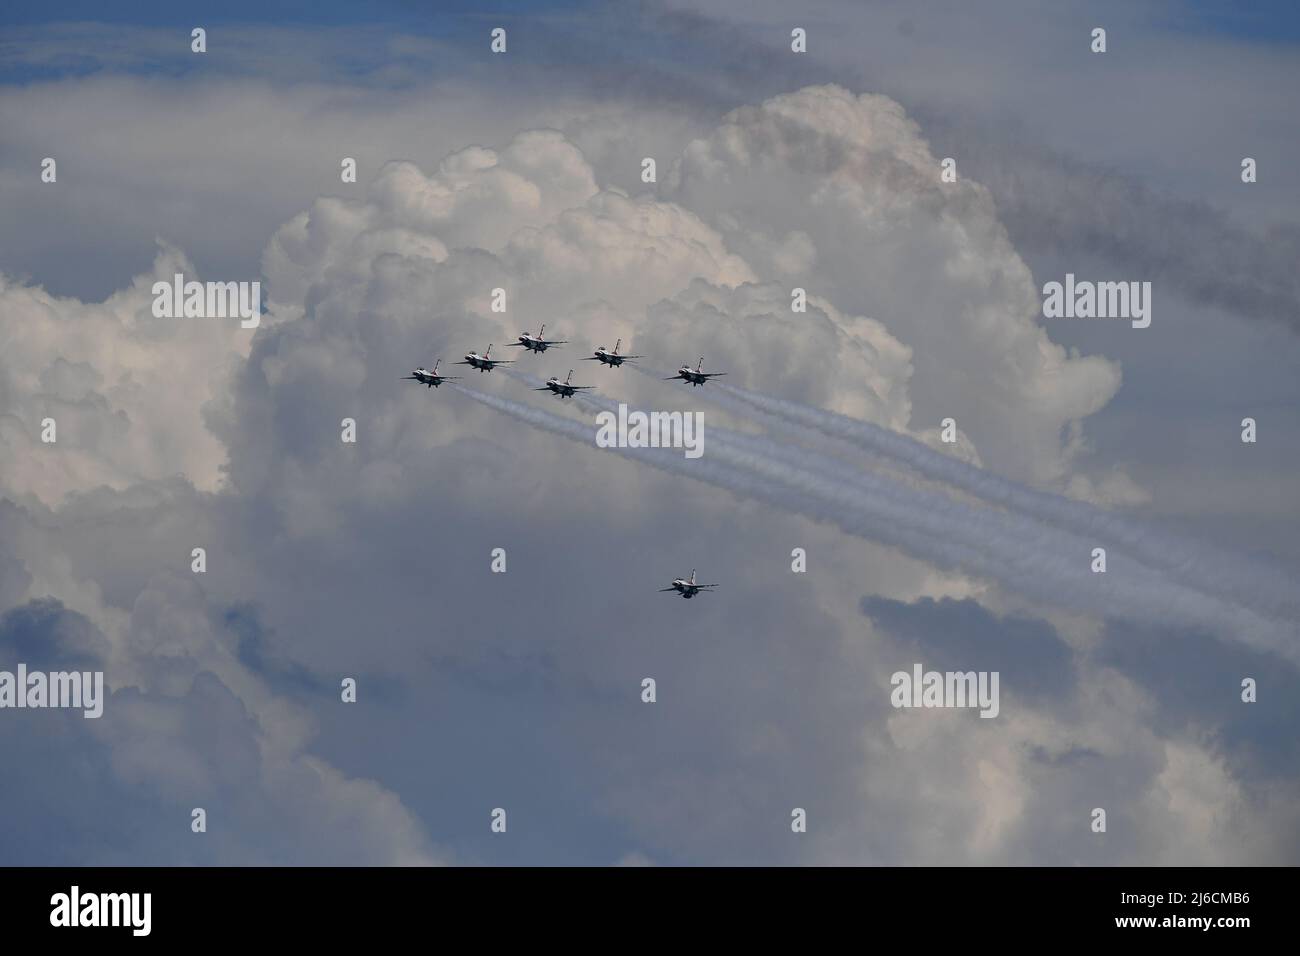 FORT LAUDERDALE FL - APRIL 29: United States Air Force Thunderbirds General Dynamics F-16 Fighting Falcon are seen in flight during practice for the Fort Lauderdale Air Show at Fort Lauderdale Beach on April 29, 2022 in Fort Lauderdale, Florida. Credit: mpi04/MediaPunch Stock Photo